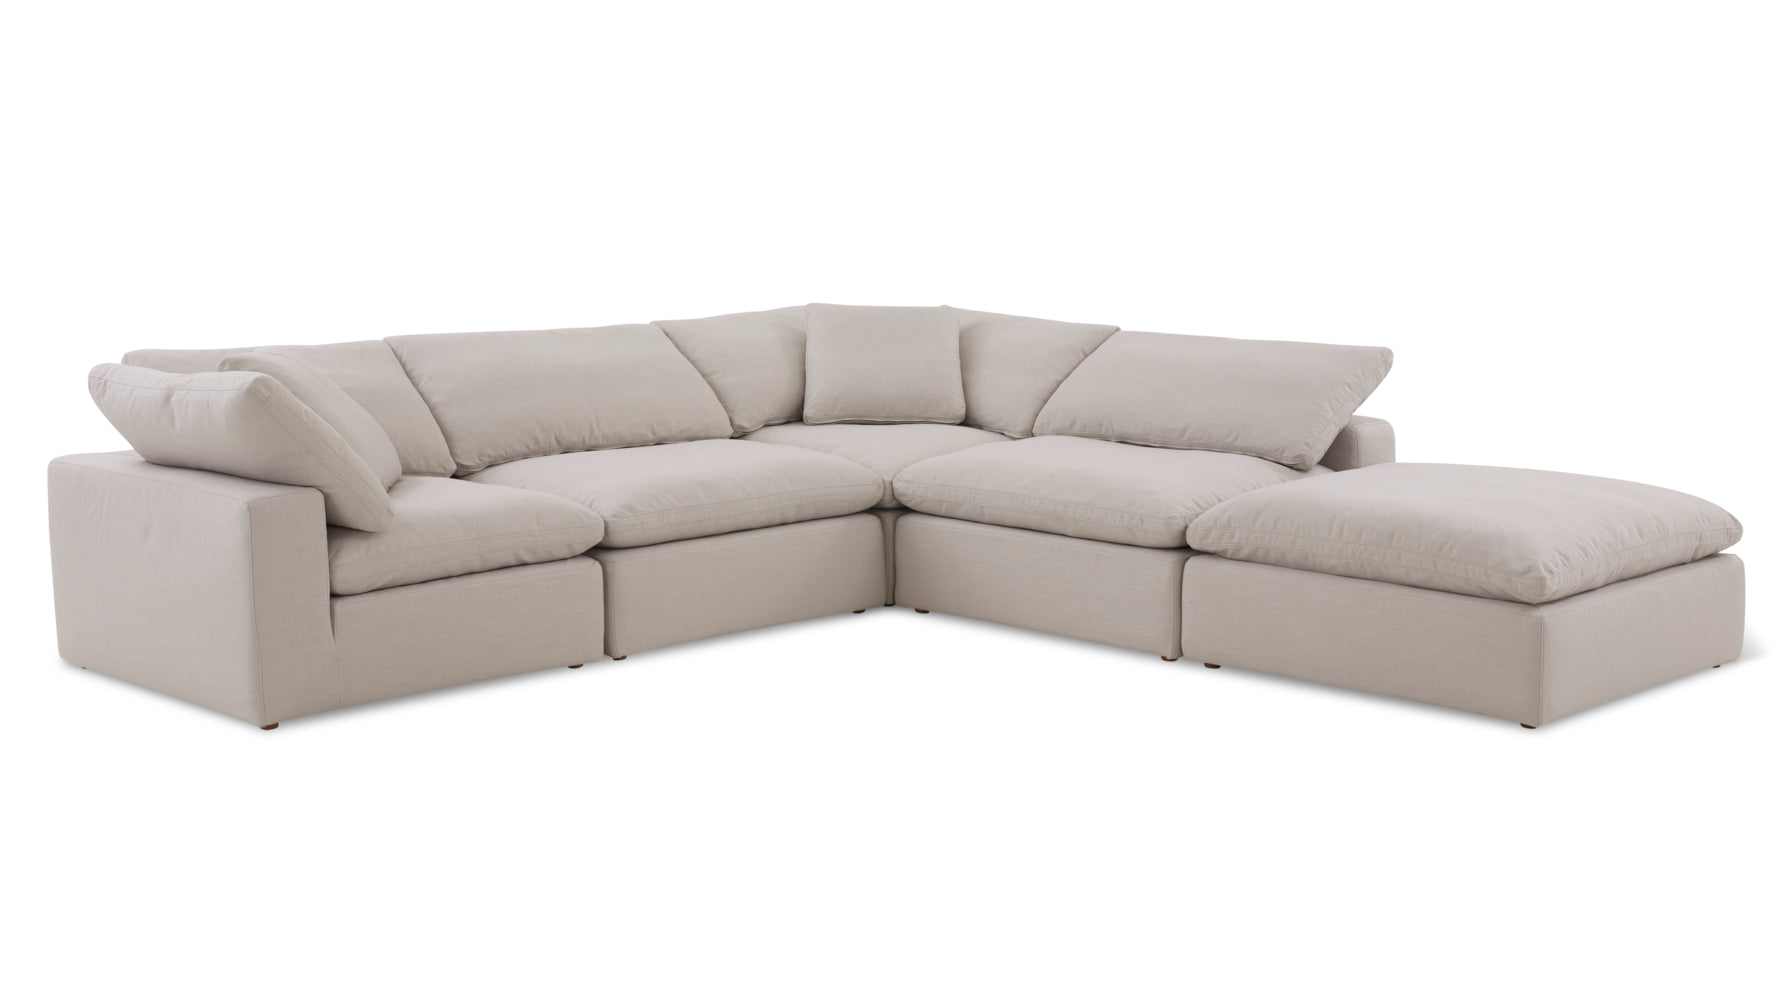 Movie Night™ 5-Piece Modular Sectional, Large, Clay - Image 6